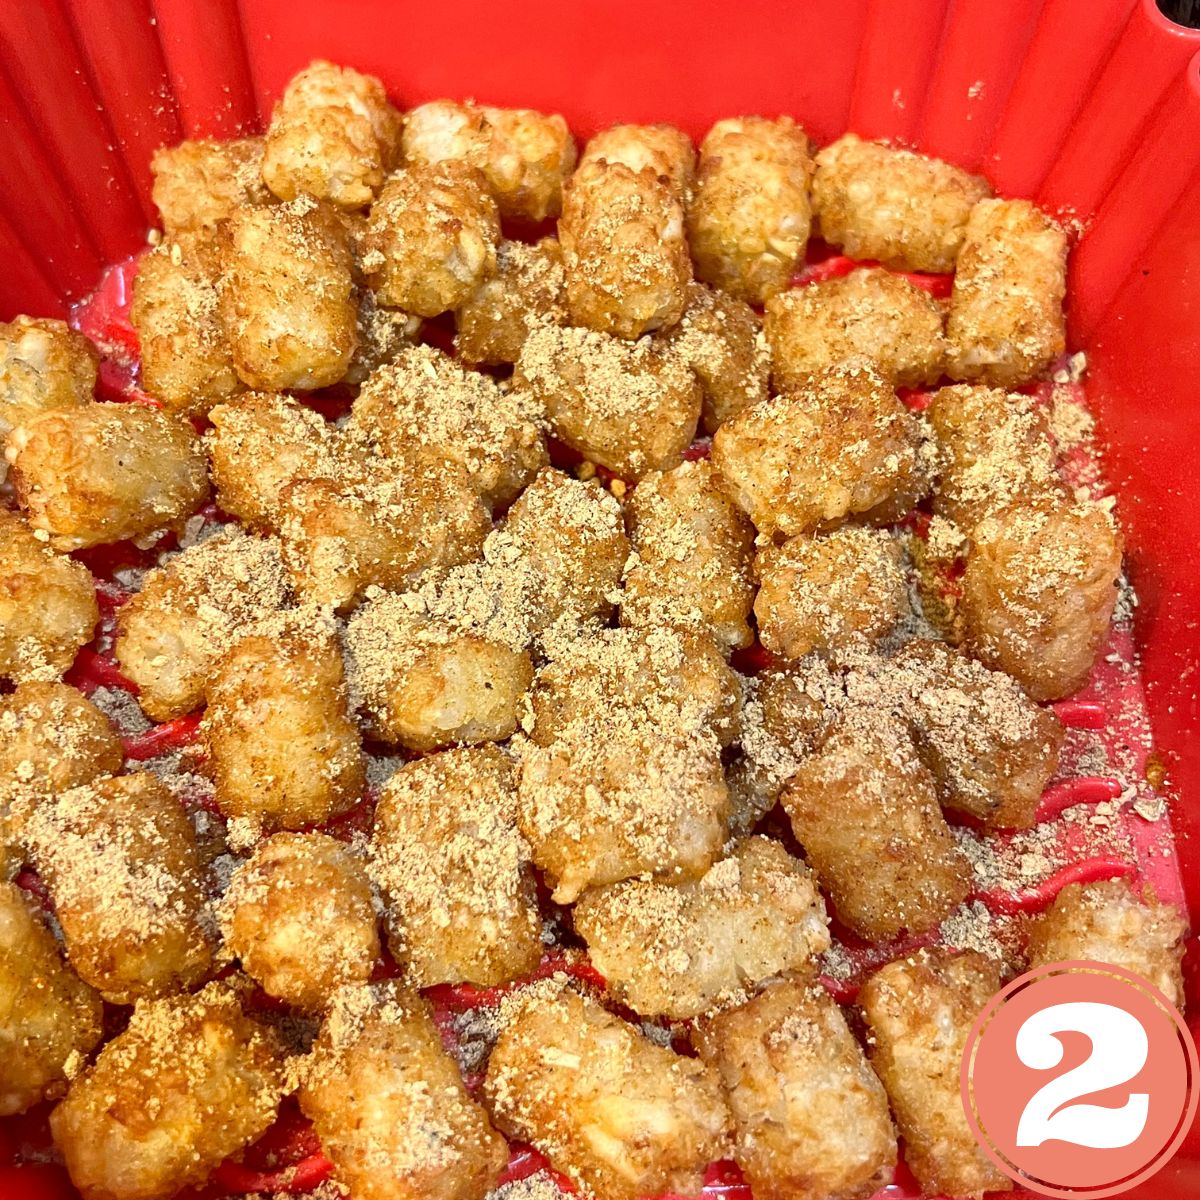 Frozen tater tots in a red silicone air fryer liner basket